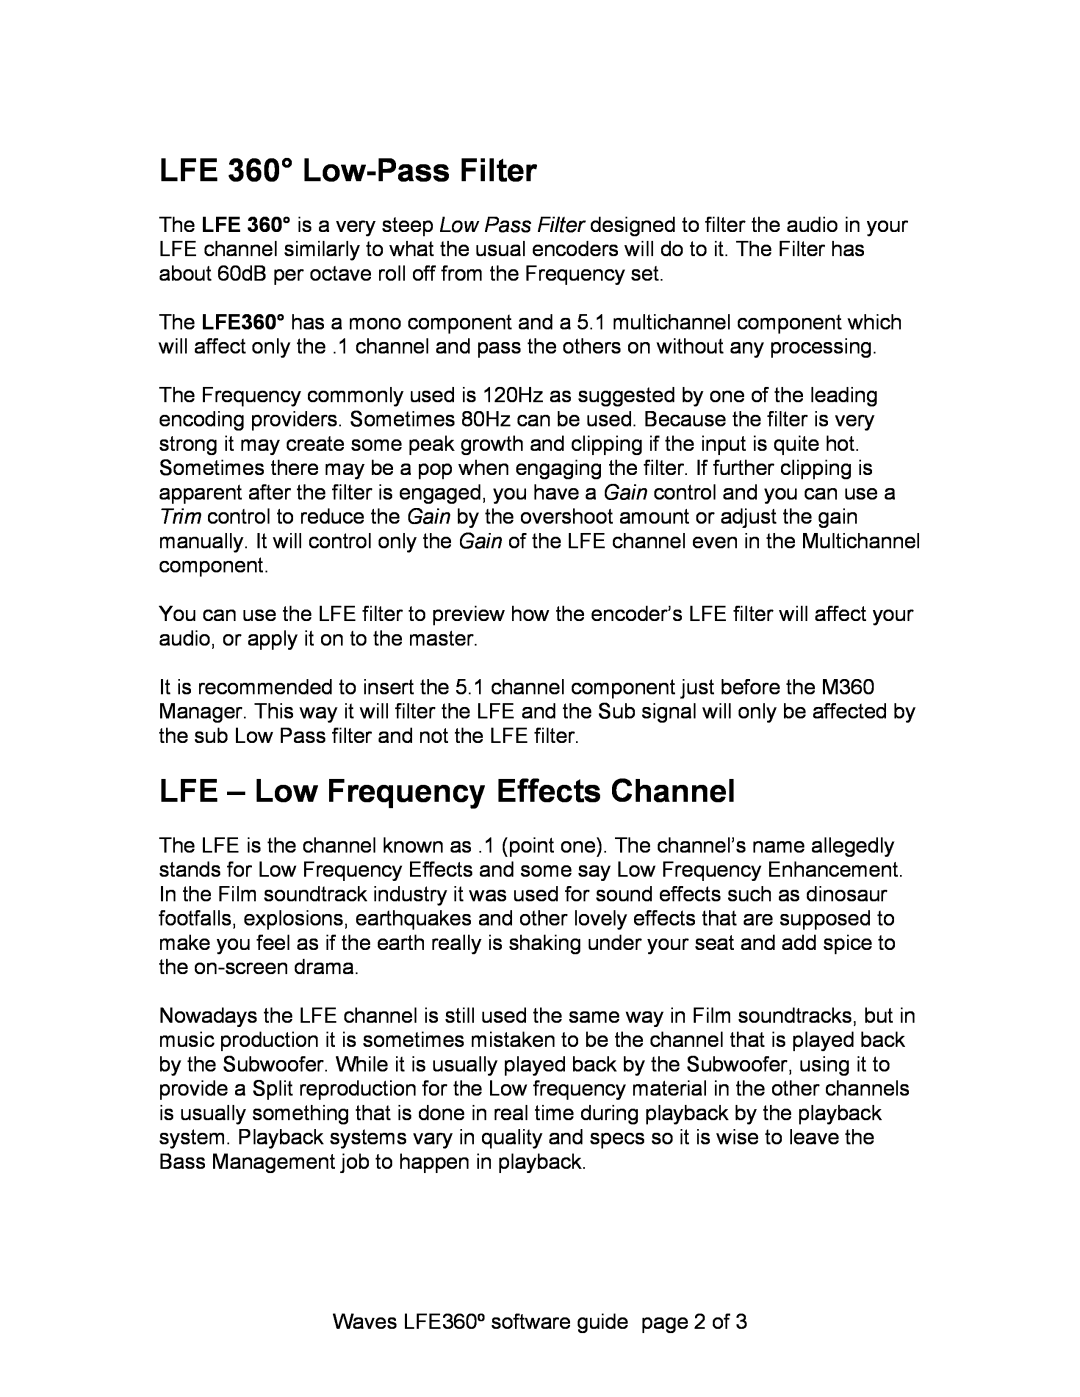 Waves LFE360 manual LFE 360 Low-PassFilter, LFE - Low Frequency Effects Channel 